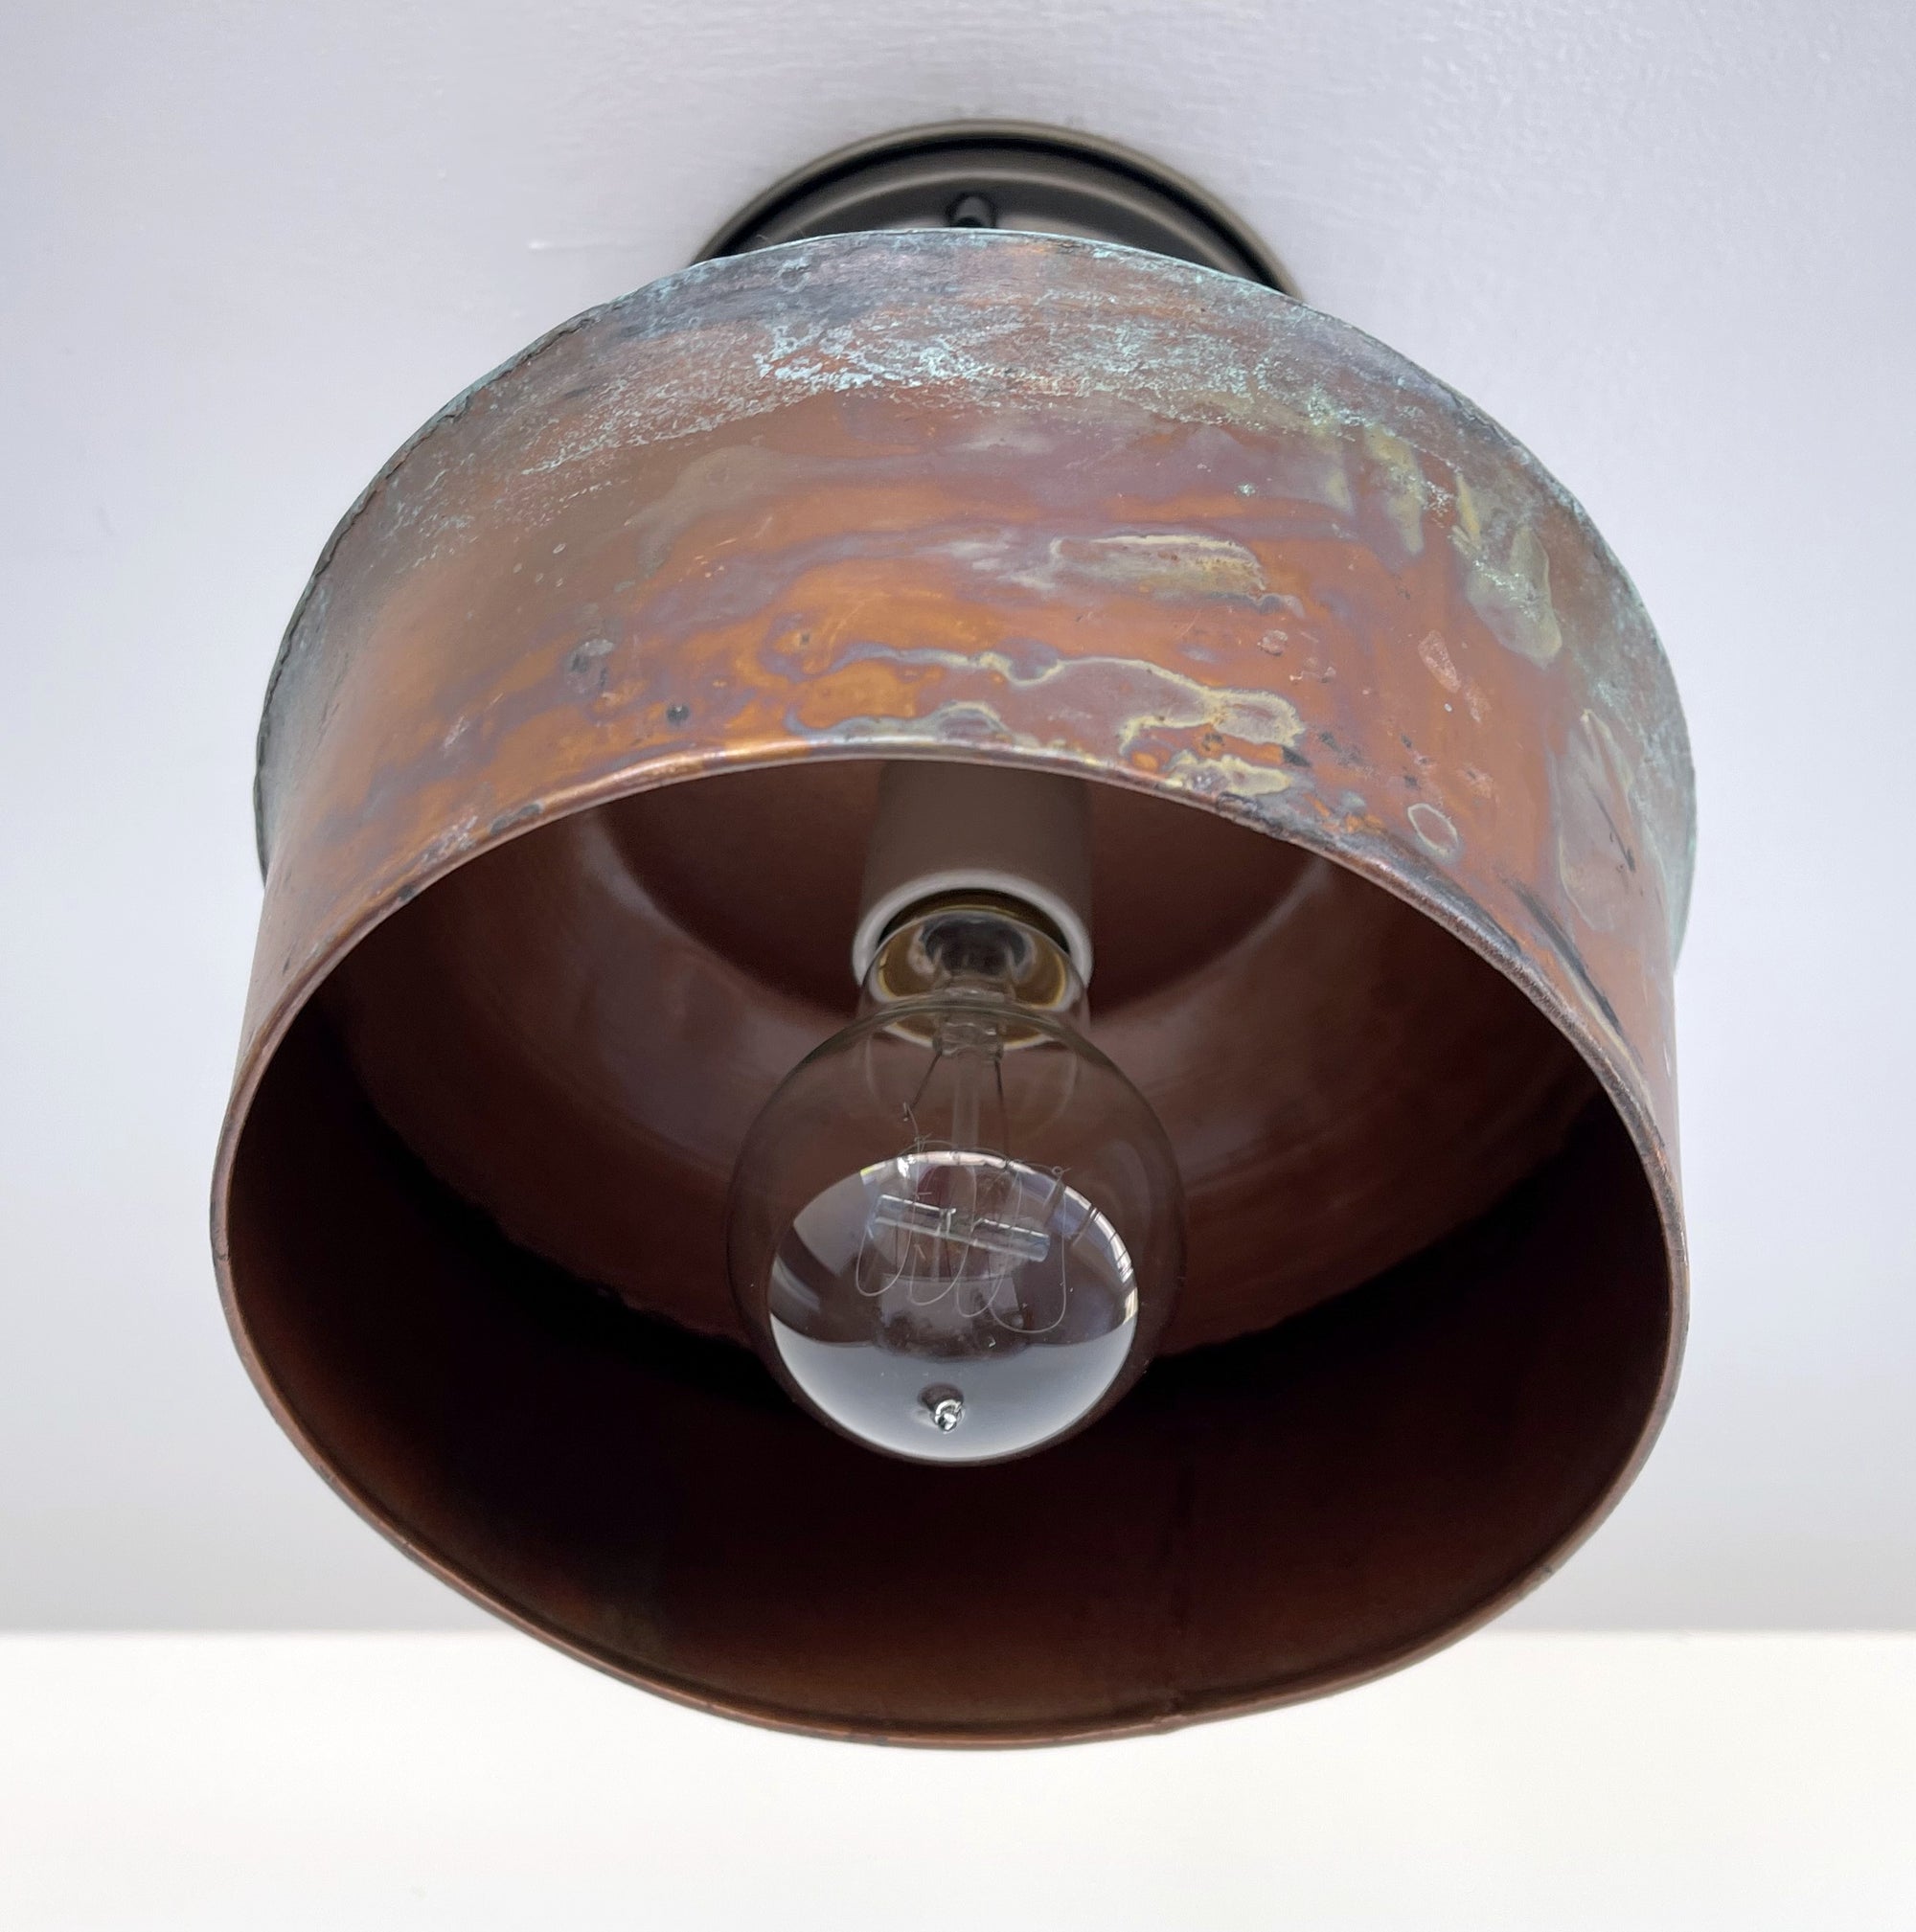 PREORDER- Handcrafted Copper Farmhouse Ceiling Light *Ships after July 30th*